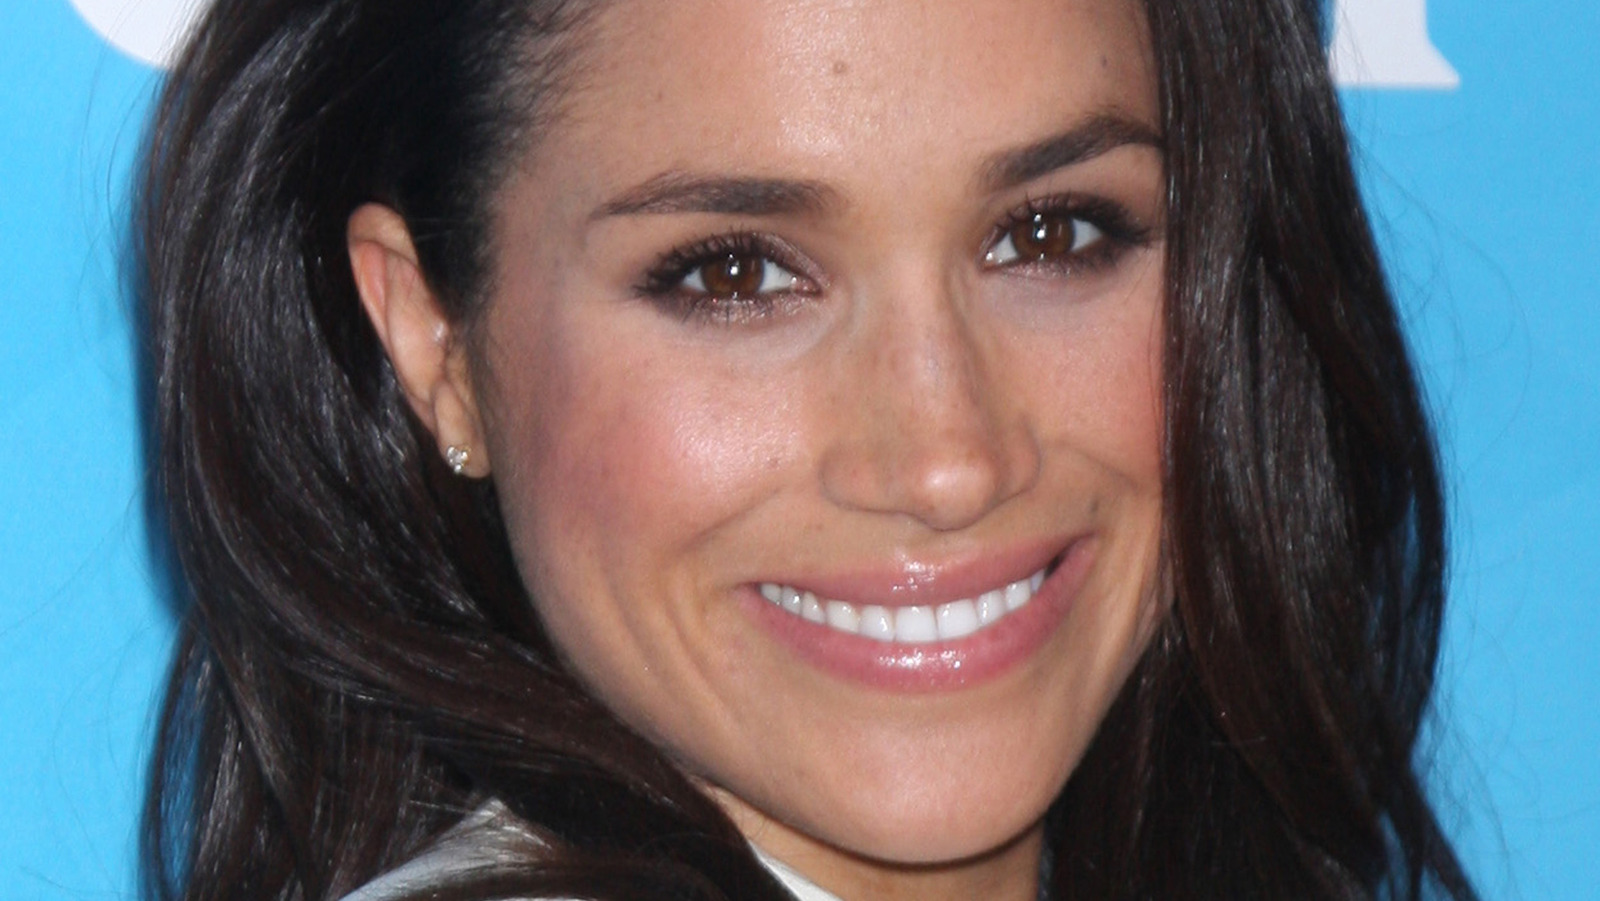 Meghan Markle's All-White Invictus Games Look Is Turning Heads